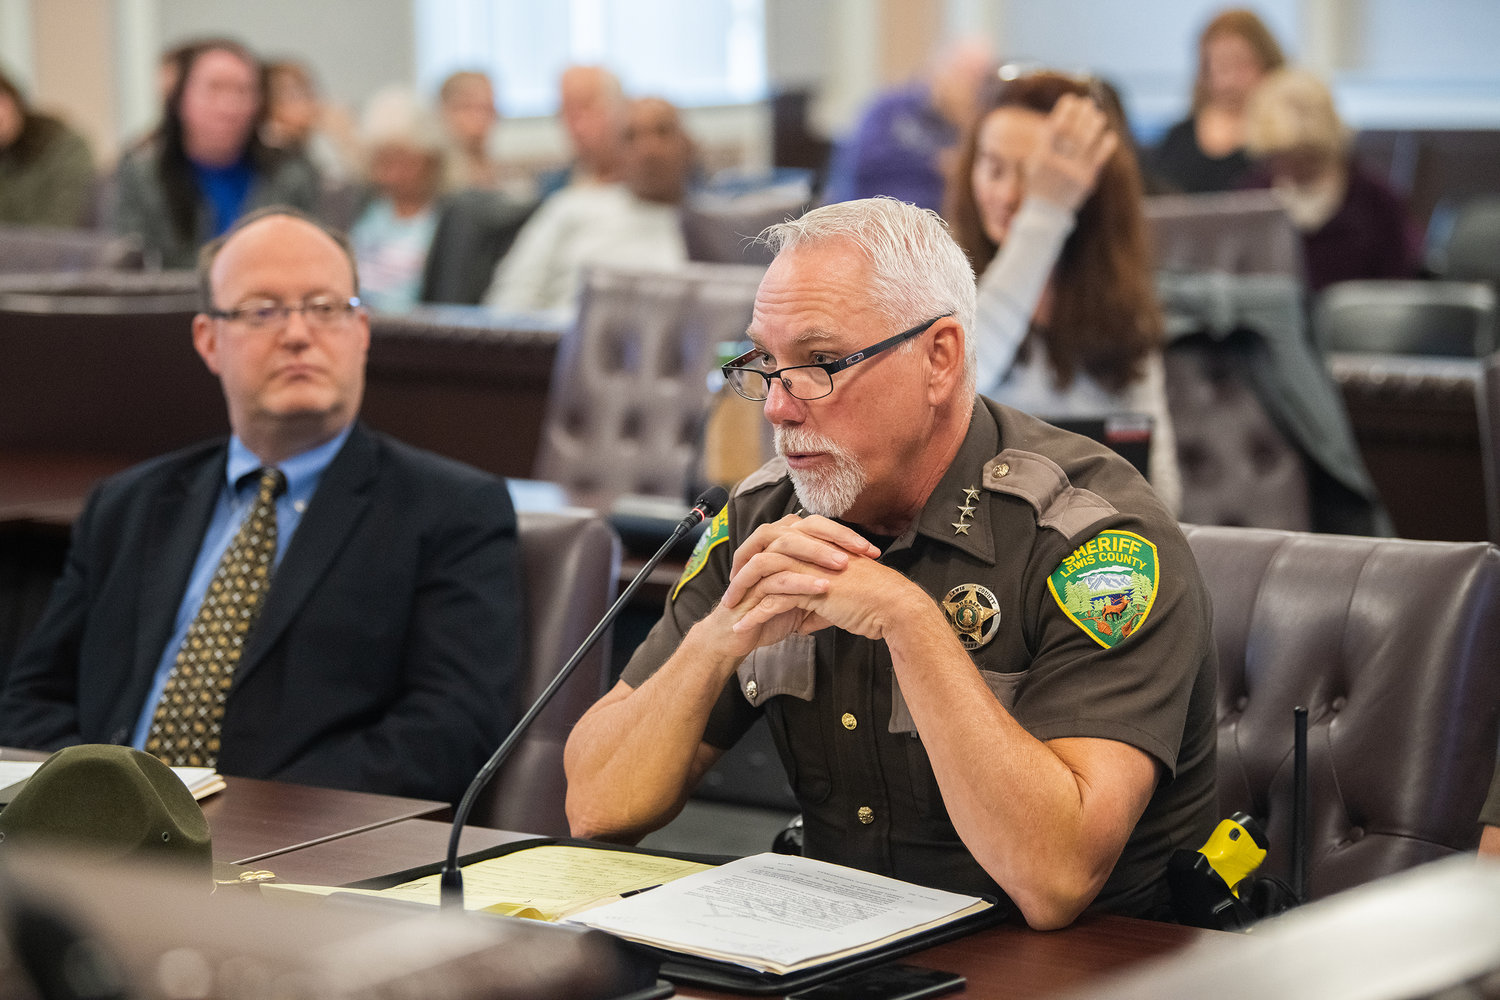 Sheriff Rob Snaza talks about homeless encampments across Lewis County during a meeting where an ordinance passed prohibiting unauthorized camping on county land adopting a resolution for homeless camp removals and site clean ups on Tuesday in Chehalis.